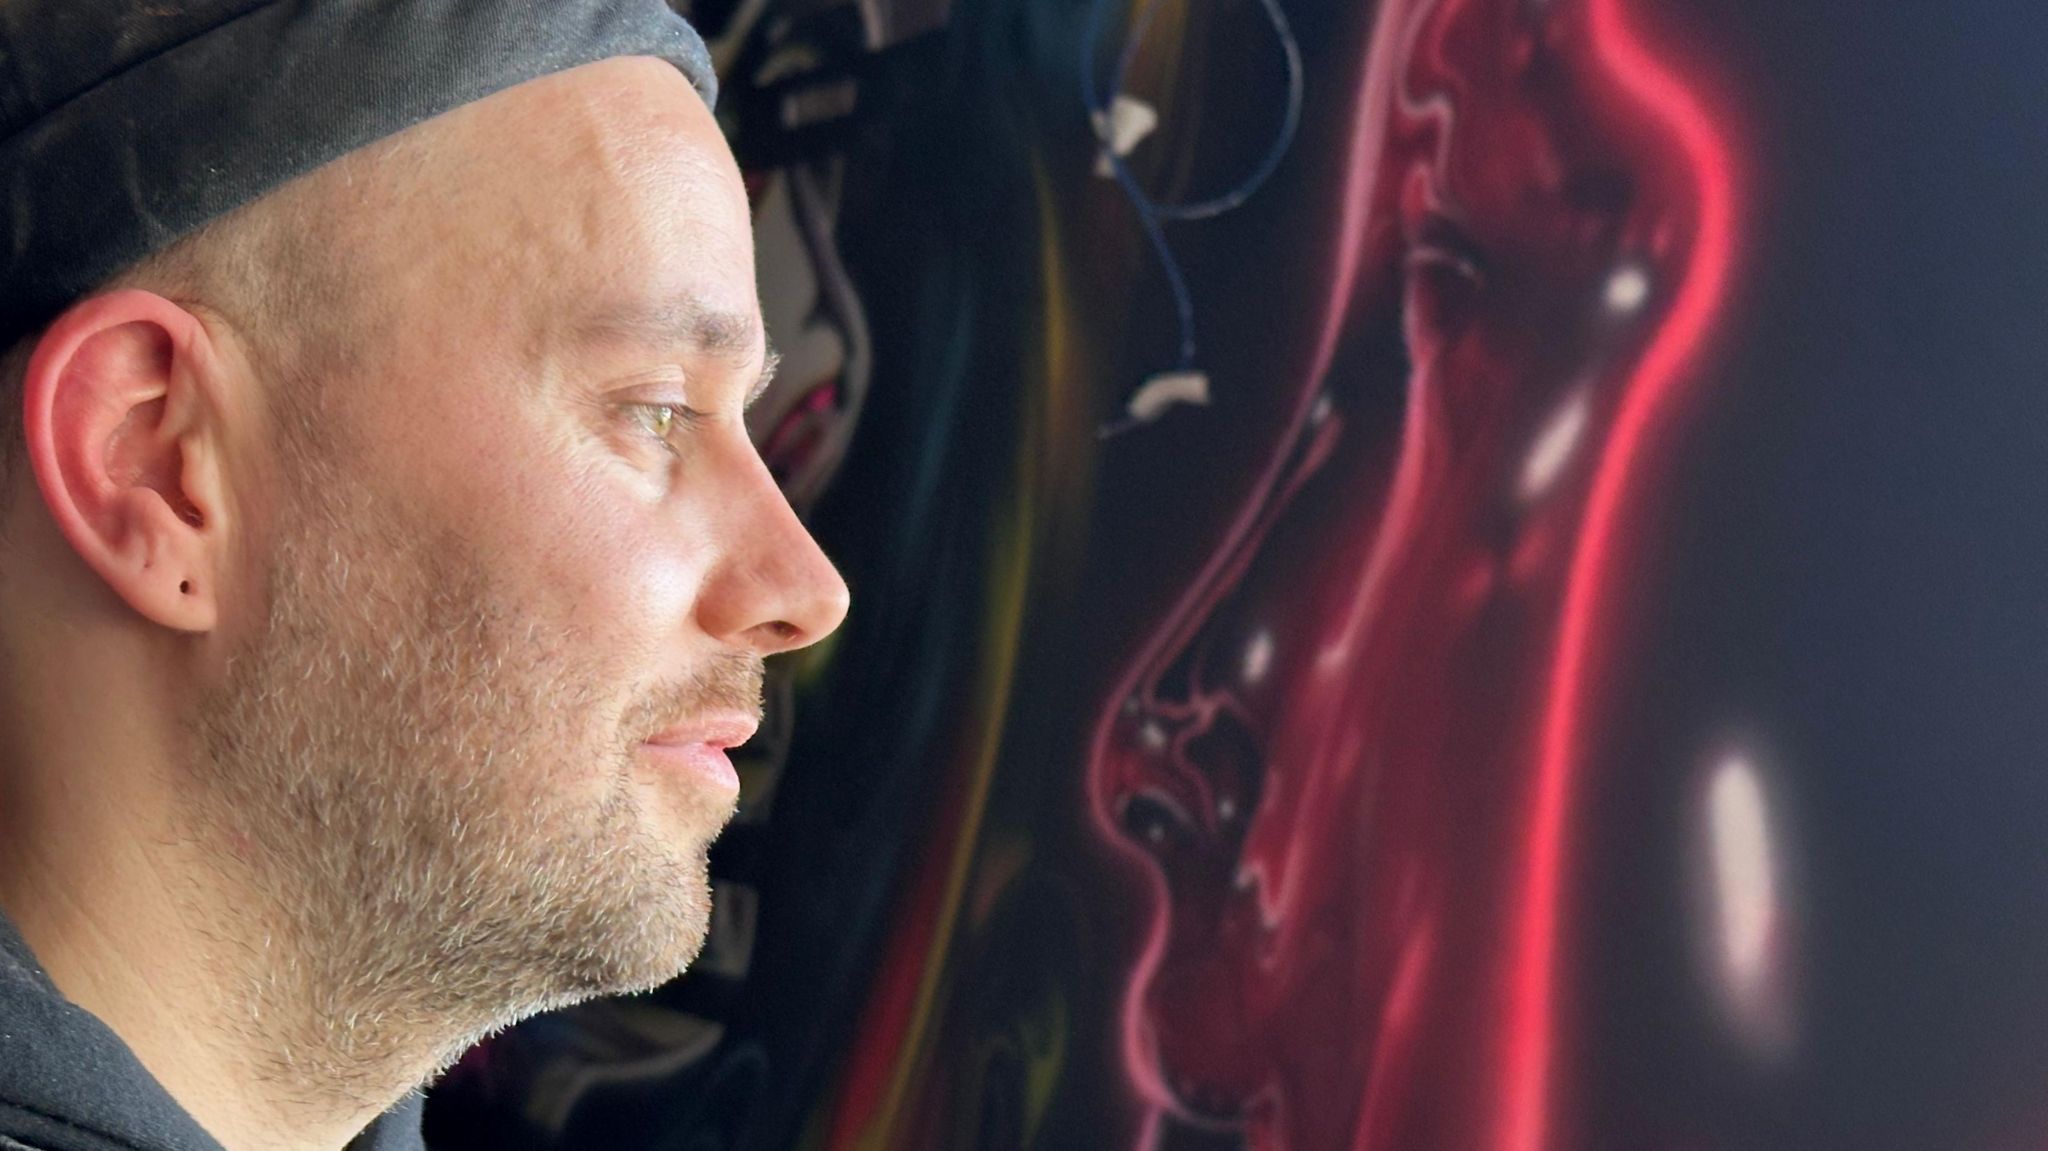 Spray paint artist Daniel Russell-Ahern staring at a red face he has painted in Snobs